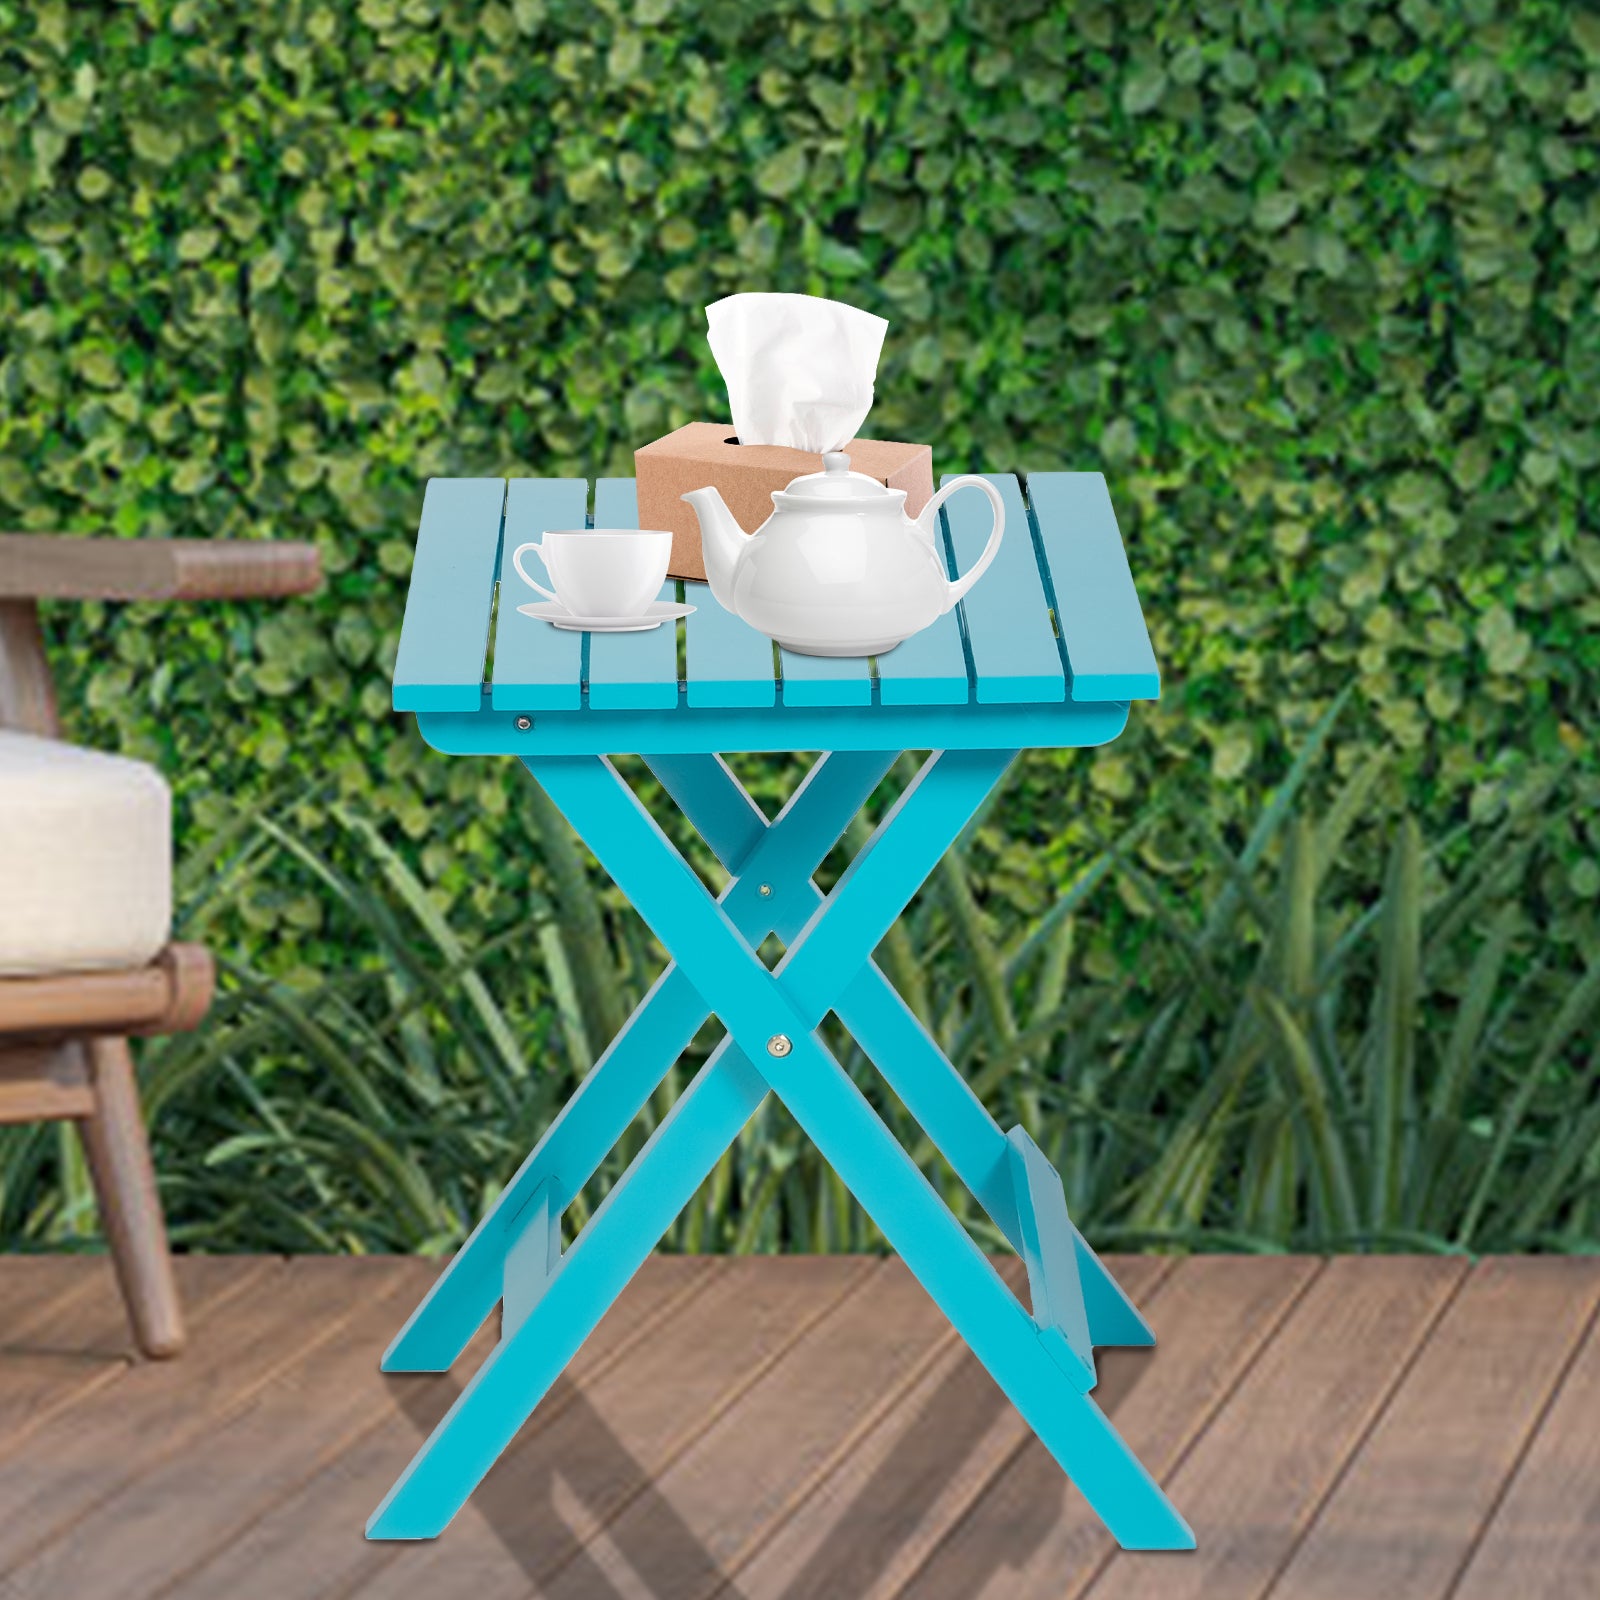 13.7" Square Outdoor Patio Folding Side Table Wood Portable End Table, Blue